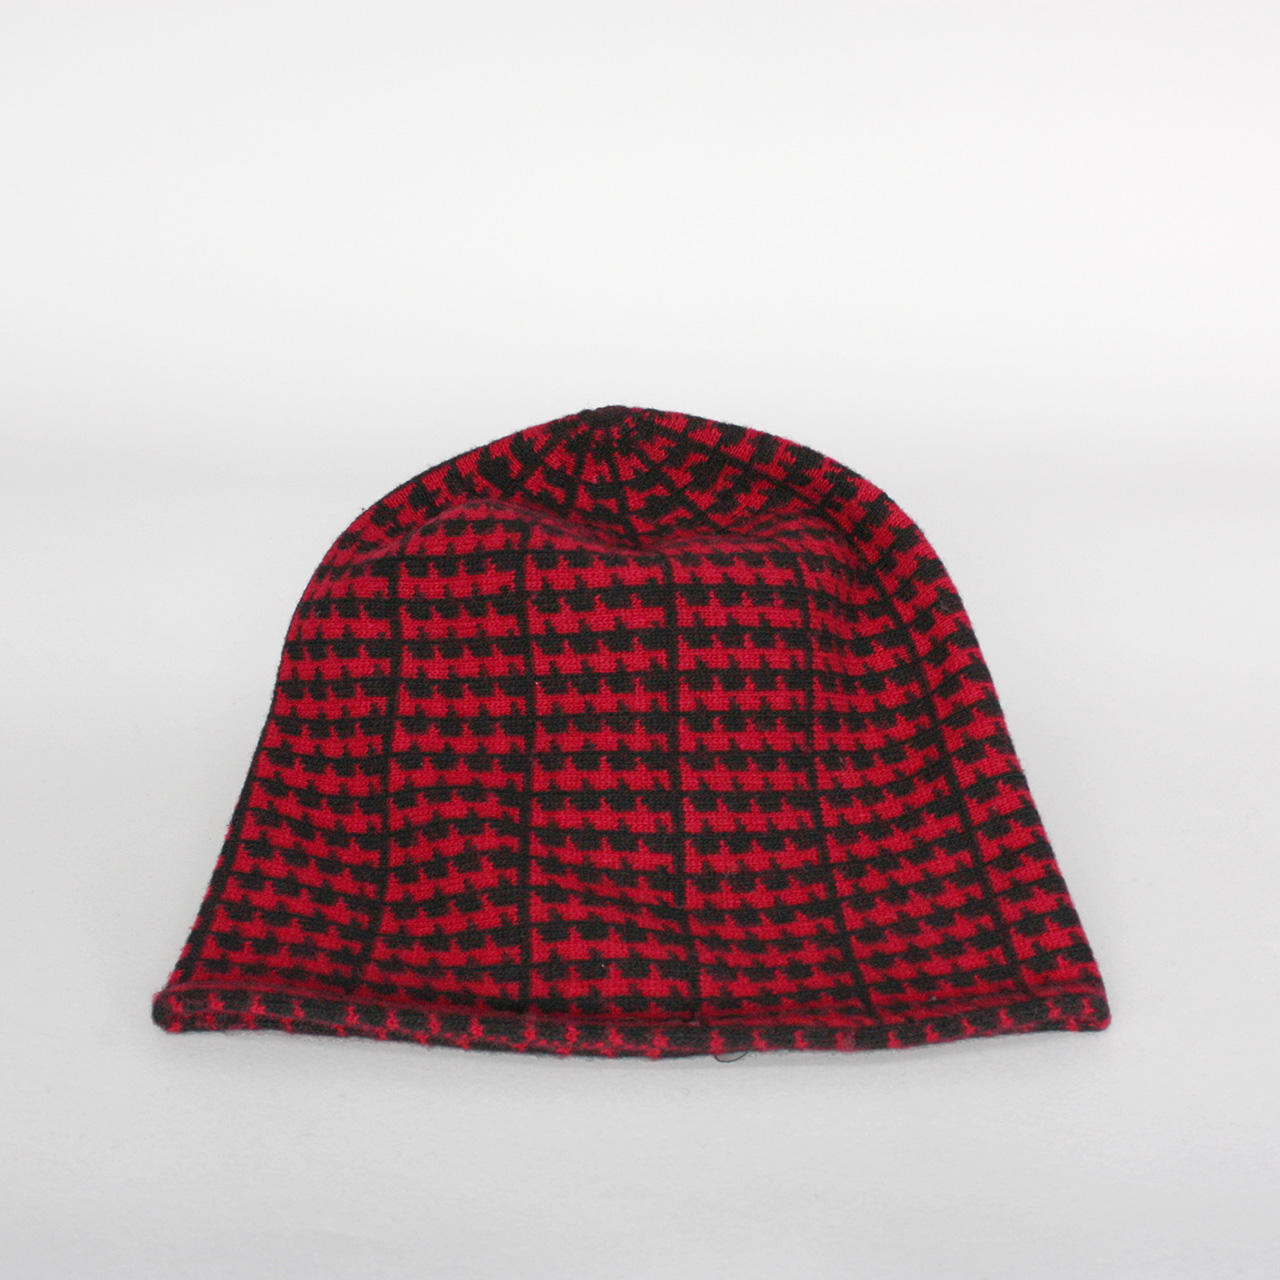 Kopka accessories Black and Titian Red Houndstooth Beanie